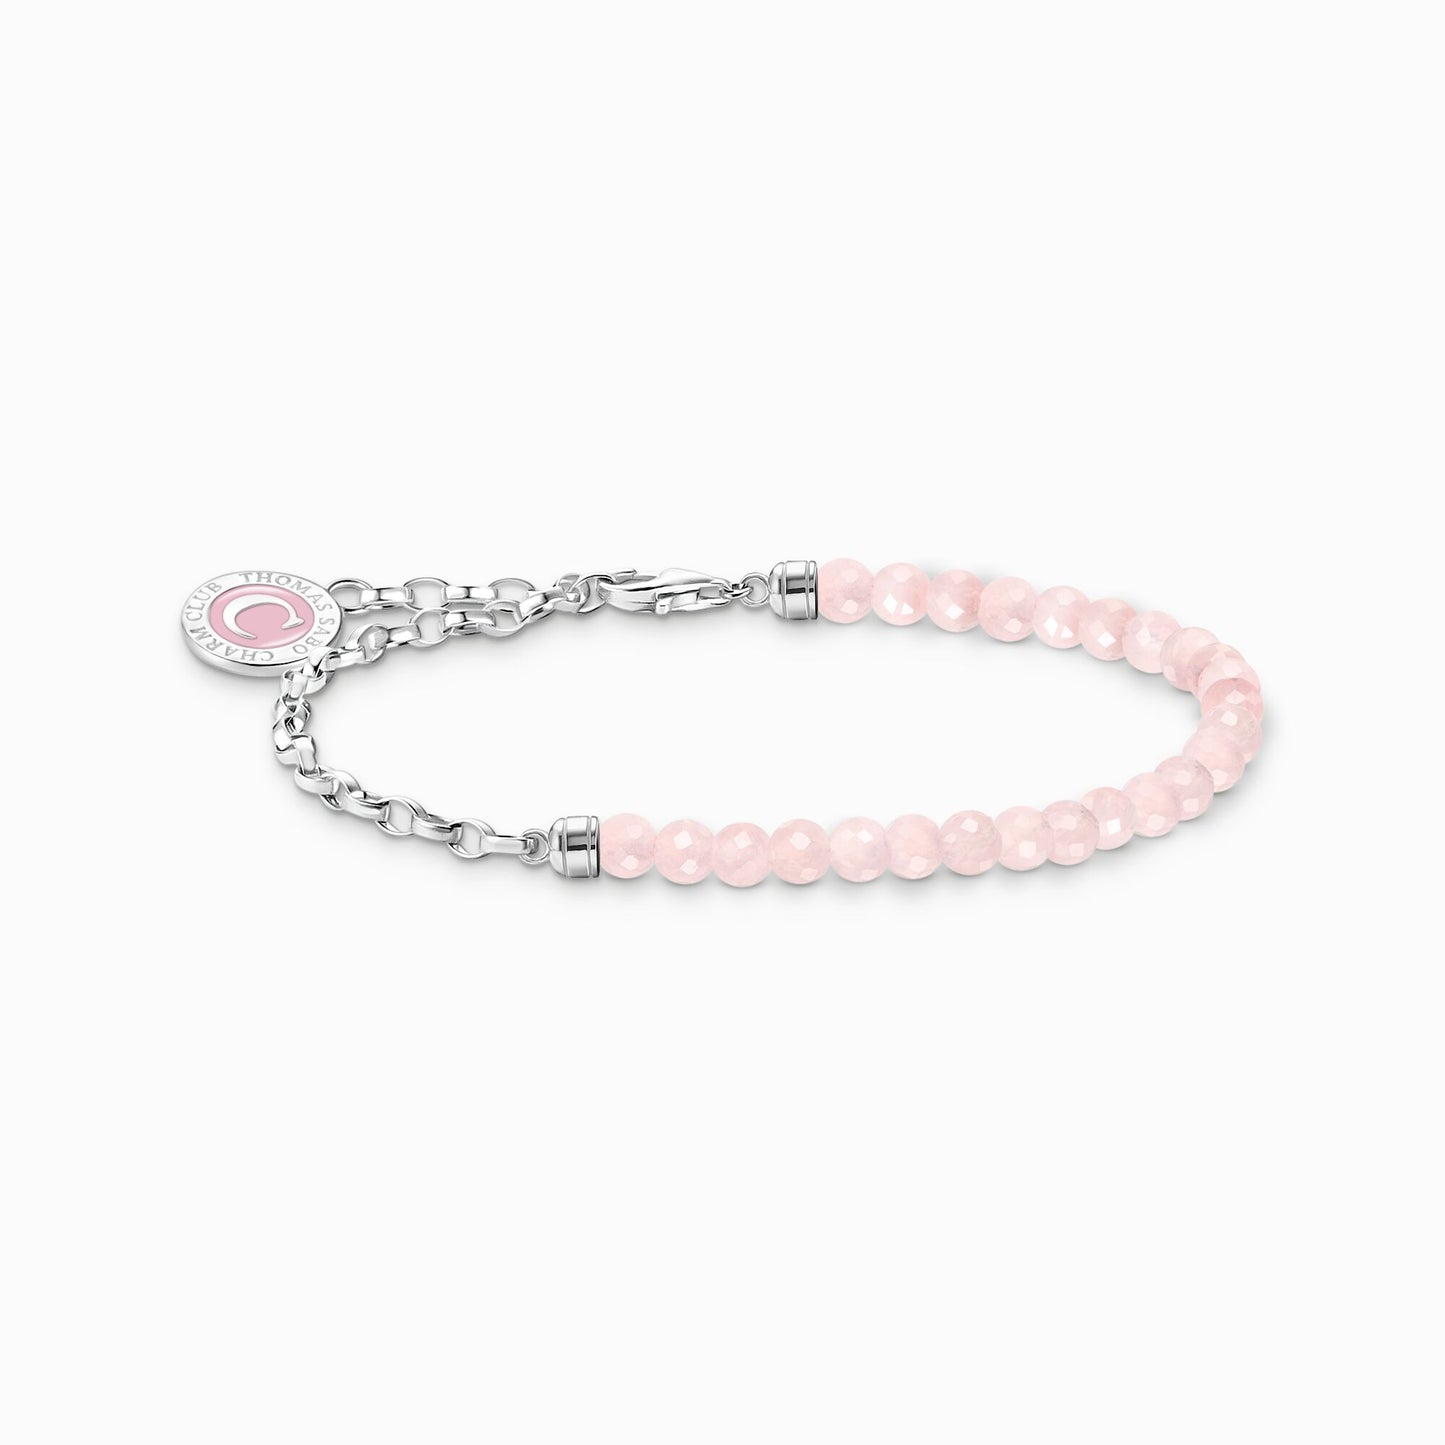 Thomas Sabo Member Charm Bracelet With Beads Of Rose Quartz And Charmista Coin Silver A2130-067-9